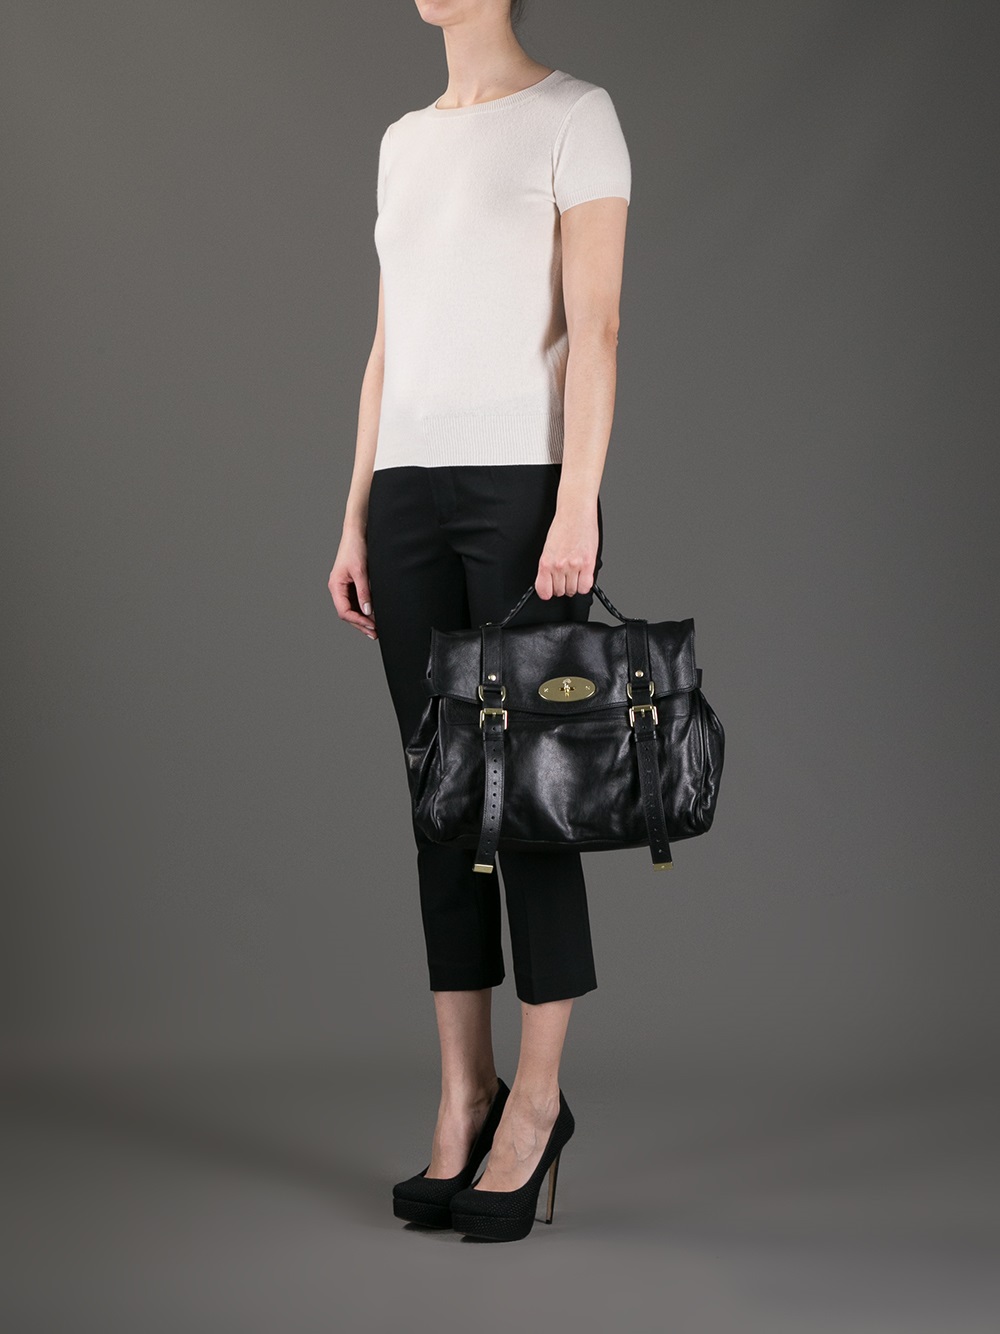 Mulberry Oversize Alexa Tote in Black - Lyst